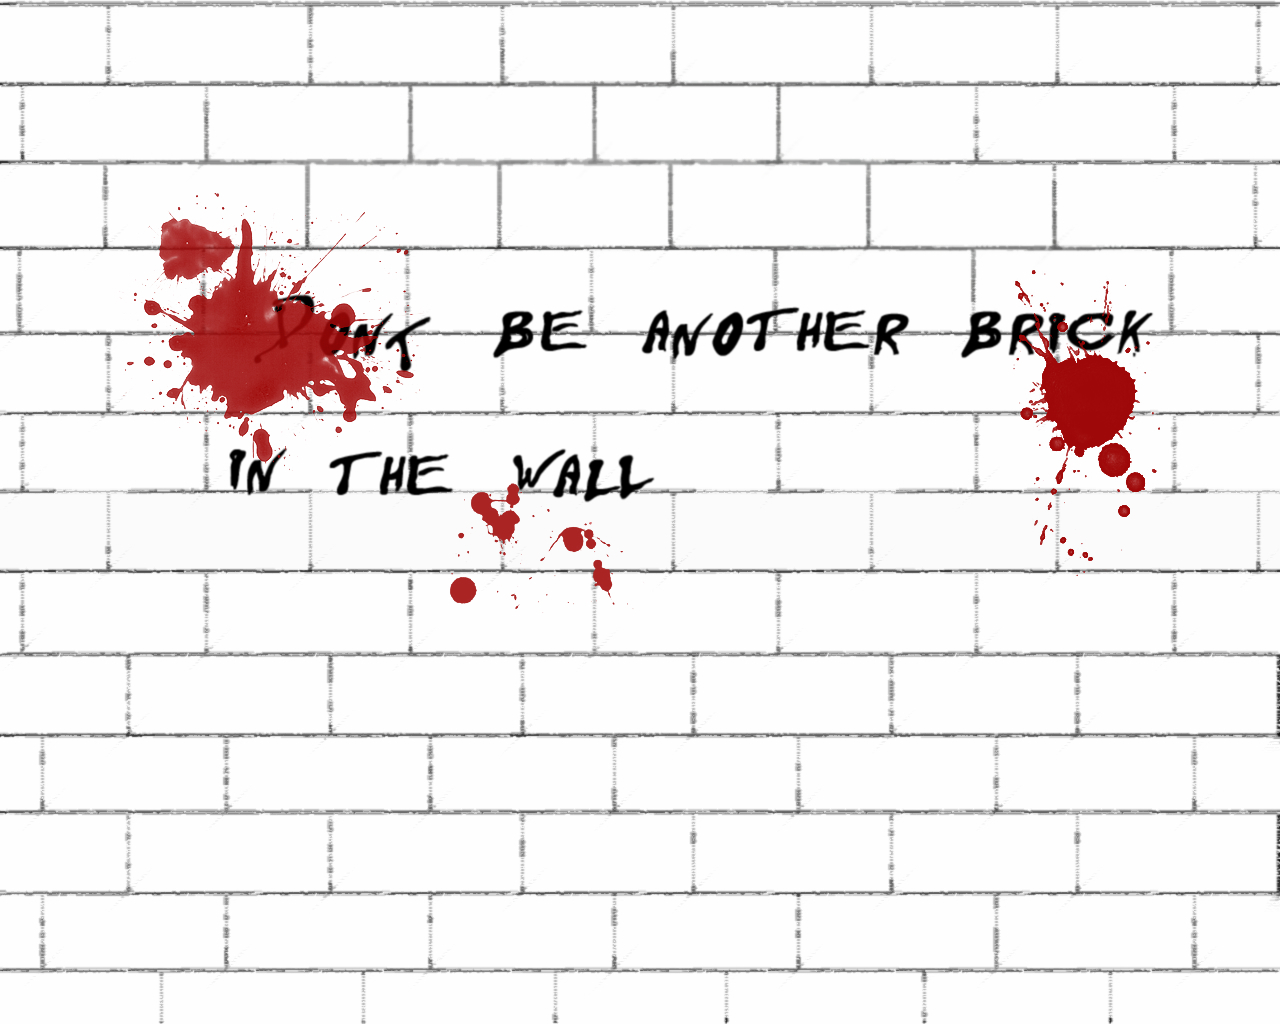 Walls cover. Another Brick in the Wall. Пинк Флойд another Brick in the Wall. Pink Floyd another Brick in the Wall обложка. Пинк Флойд кирпич в стене.